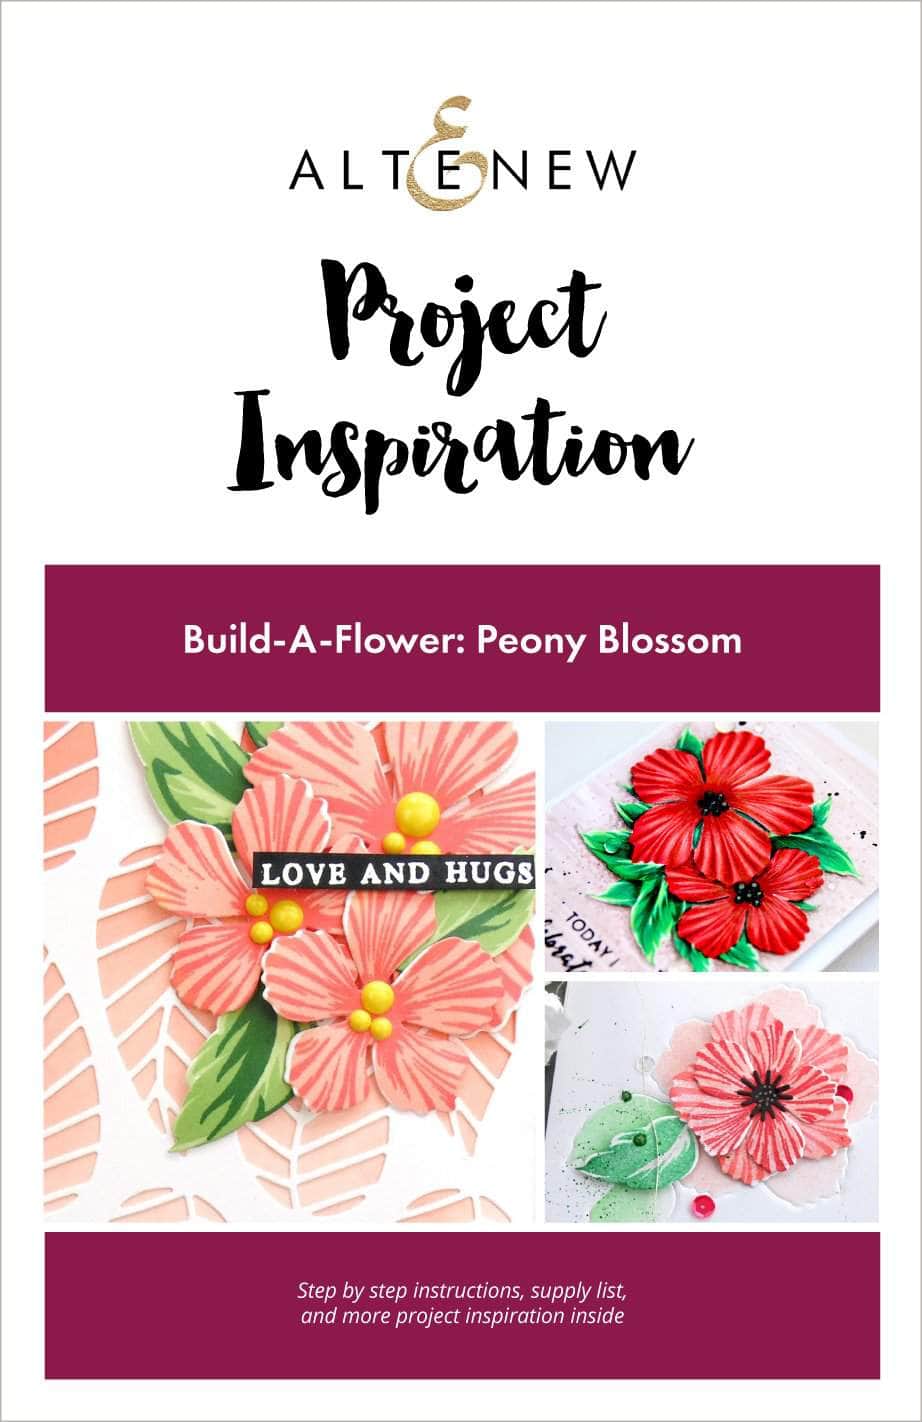 Printed Media Build-A-Flower: Peony Blossom Project Inspiration Guide